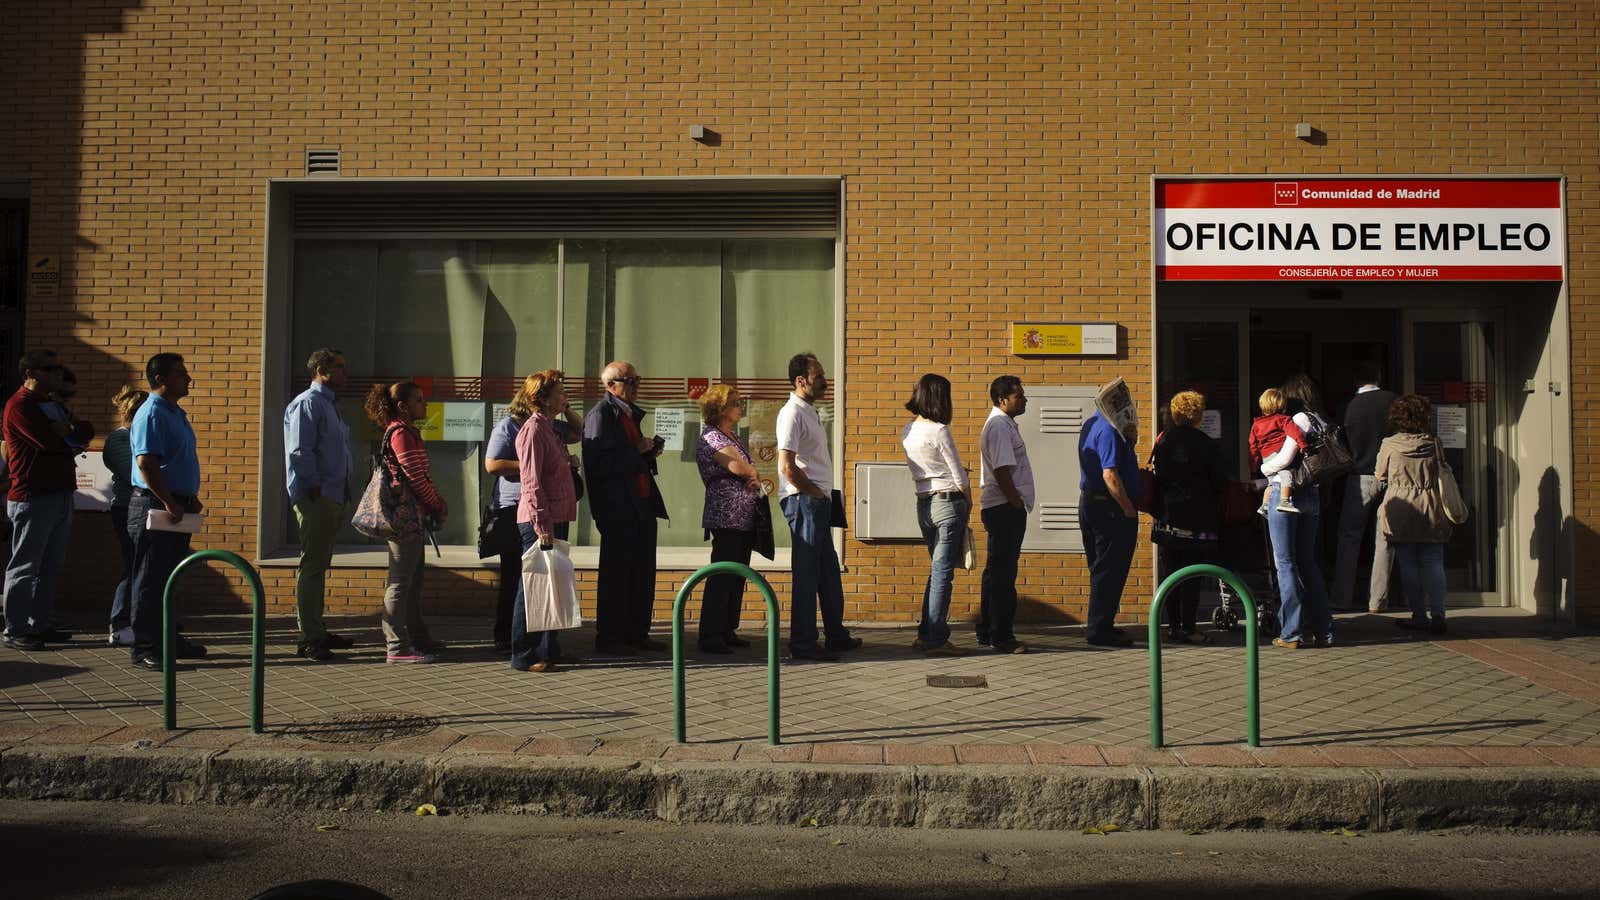 The queue to enter a government job center in Madrid, Spain.